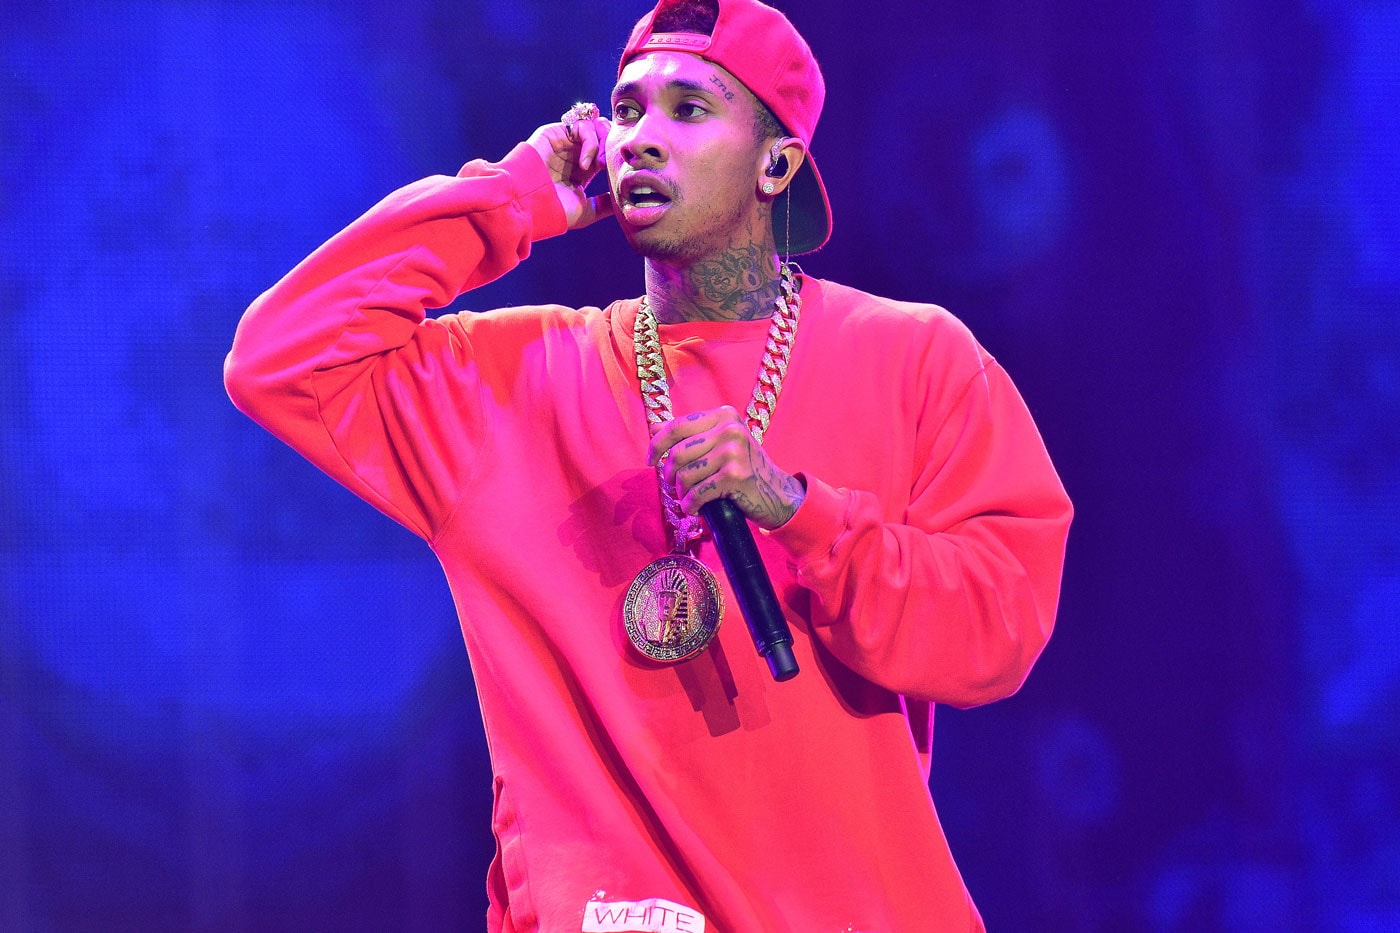 Tyga Debuts Music Video for "Stimulated" Which Features Kylie Jenner